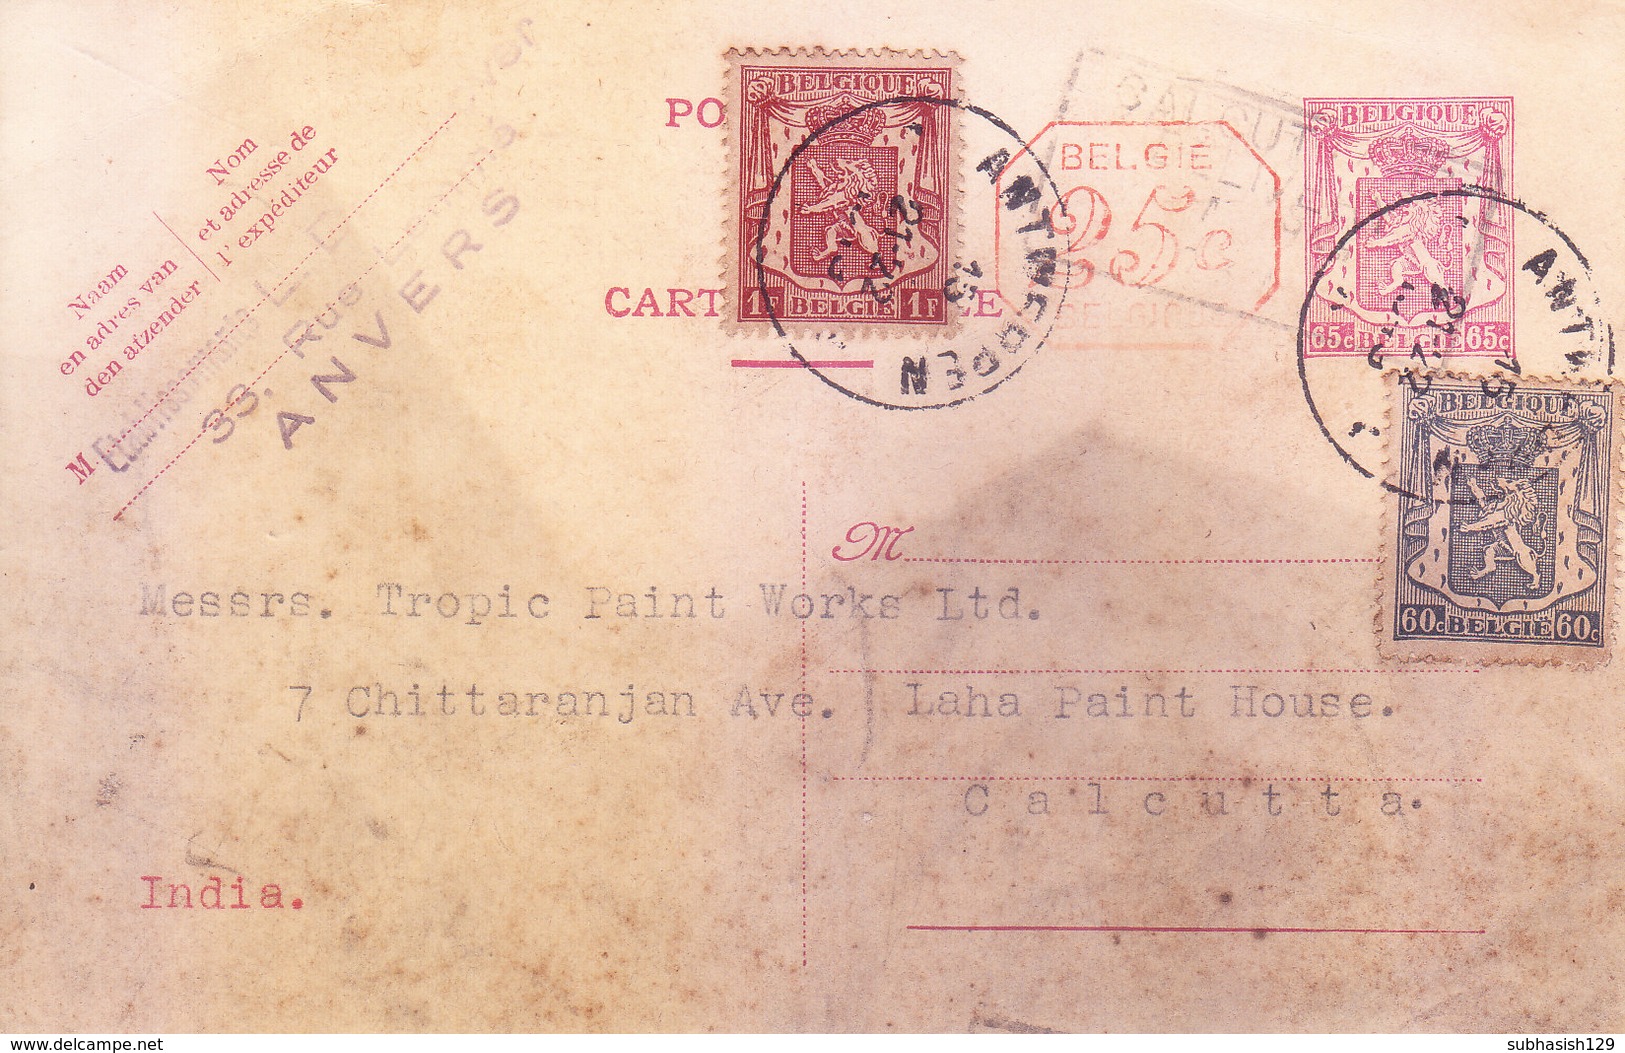 BELGIUM 1949 UPRATED POST CARD POSTED FROM ANTWERPEN FOR INDIA - USE OF ADDITIONAL 2V DIFFERENT STAMPS - Covers & Documents